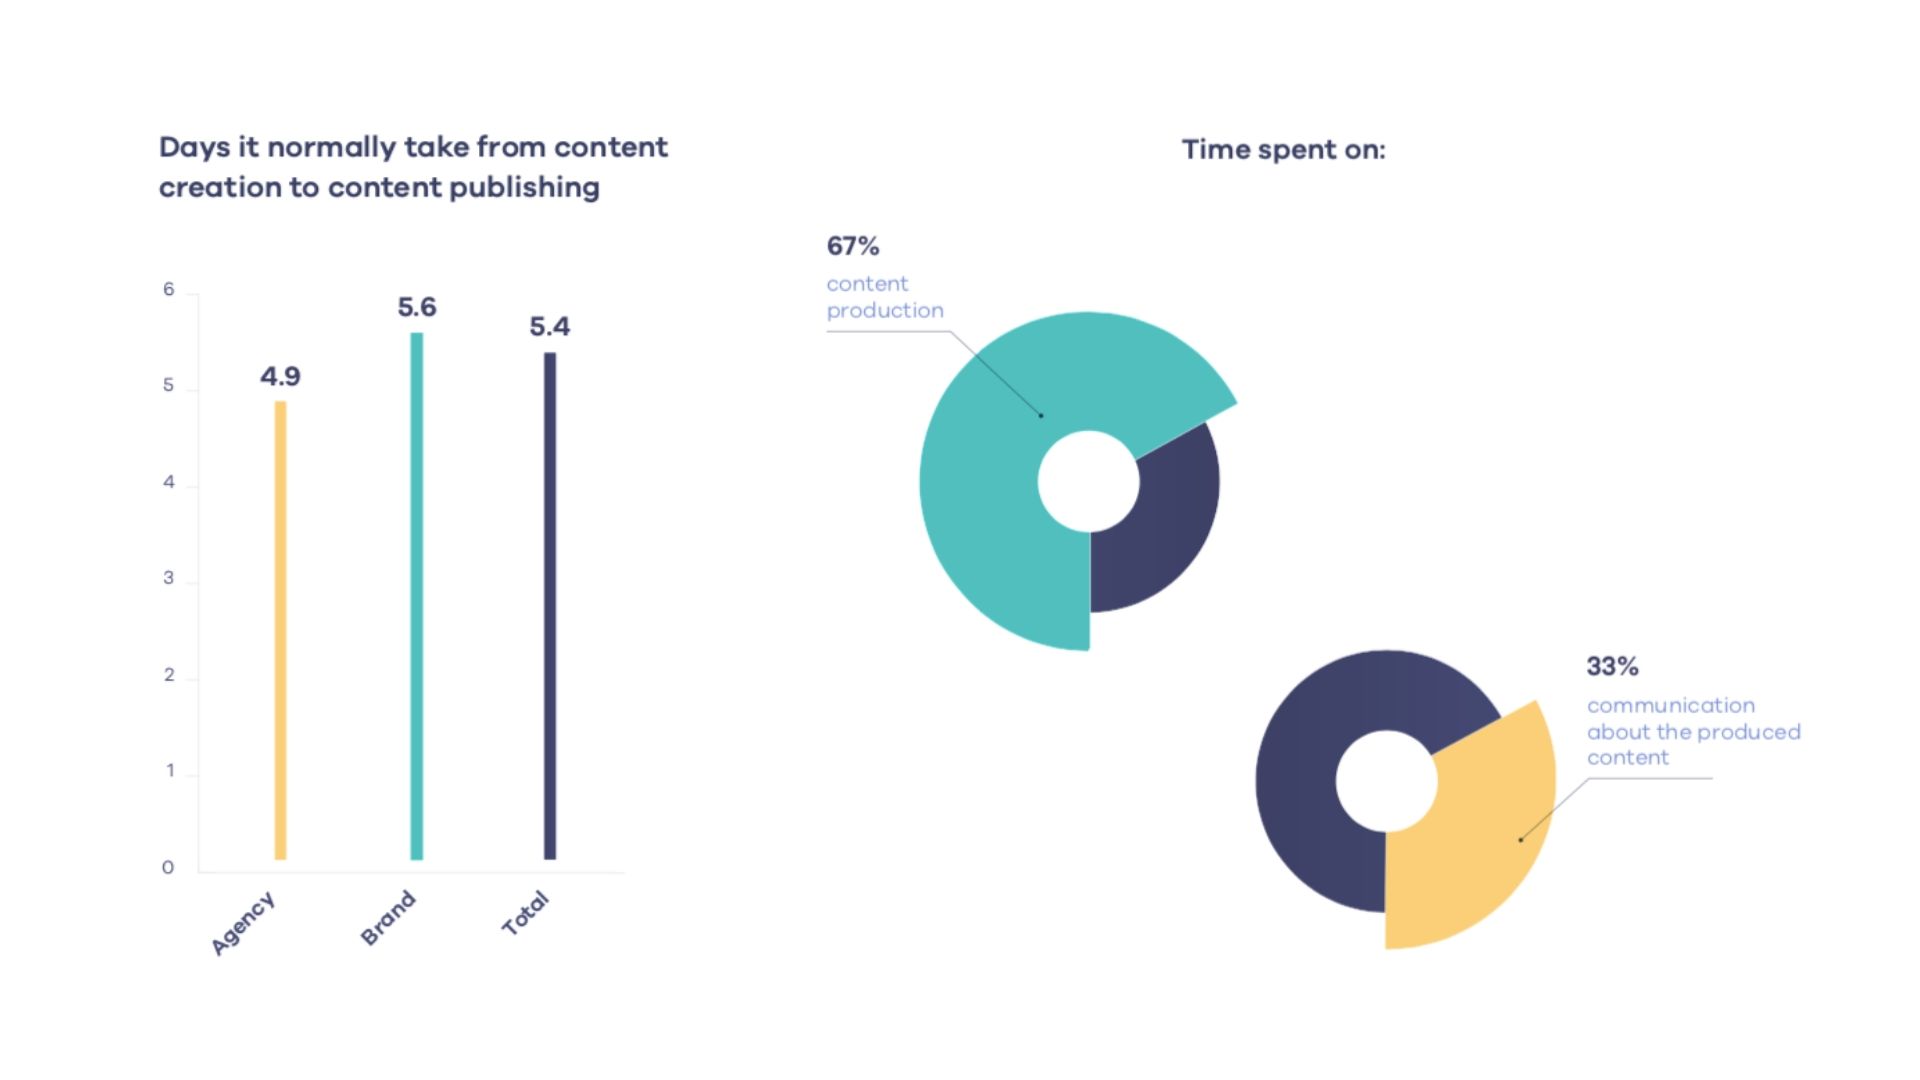 From content creation to content publishing